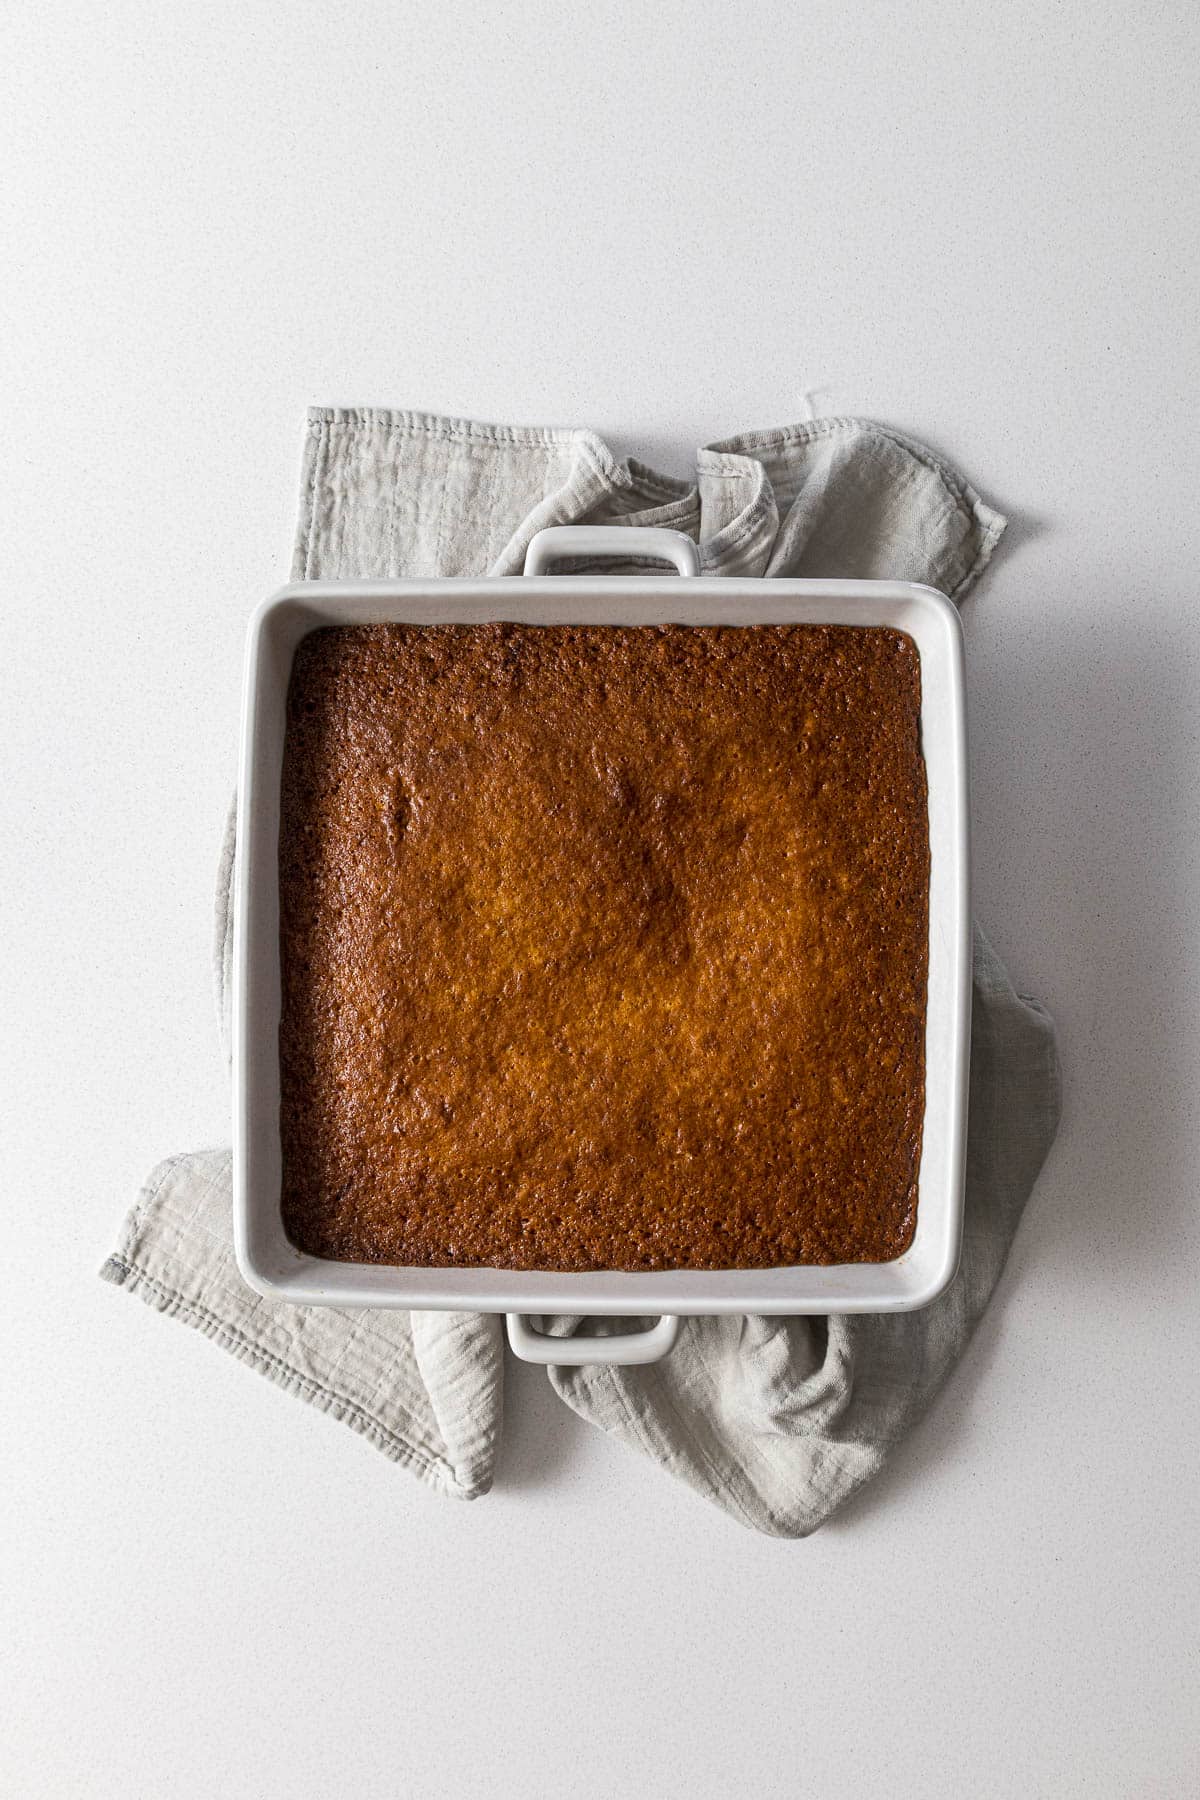 Step 6 - baked pudding with a deep golden brown color. 